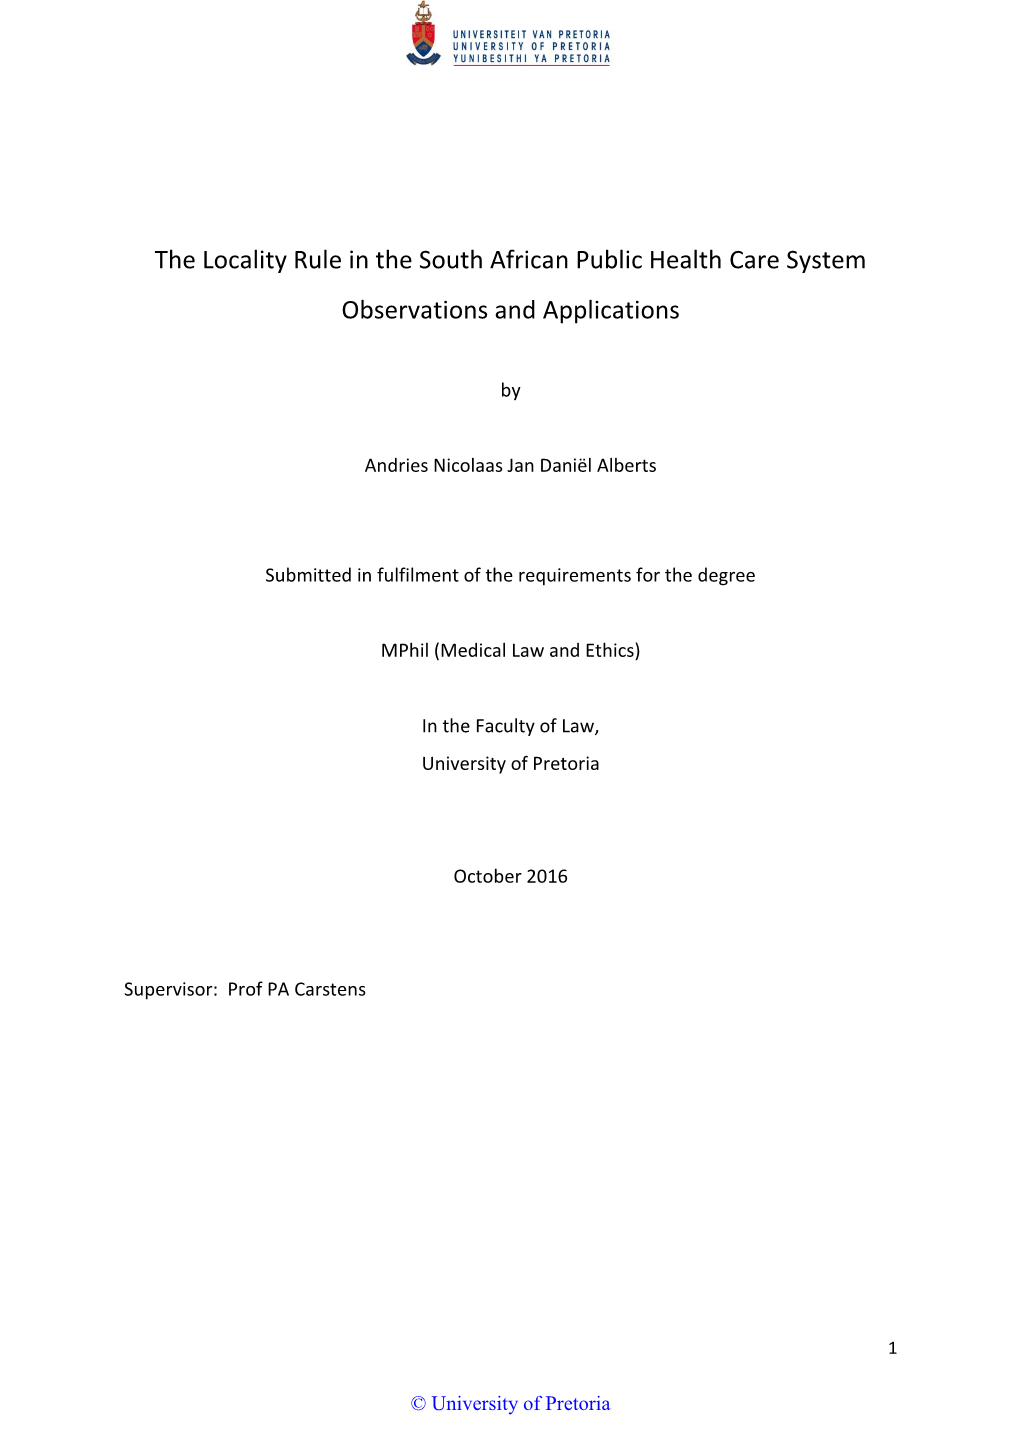 The Locality Rule in the South African Public Health Care System